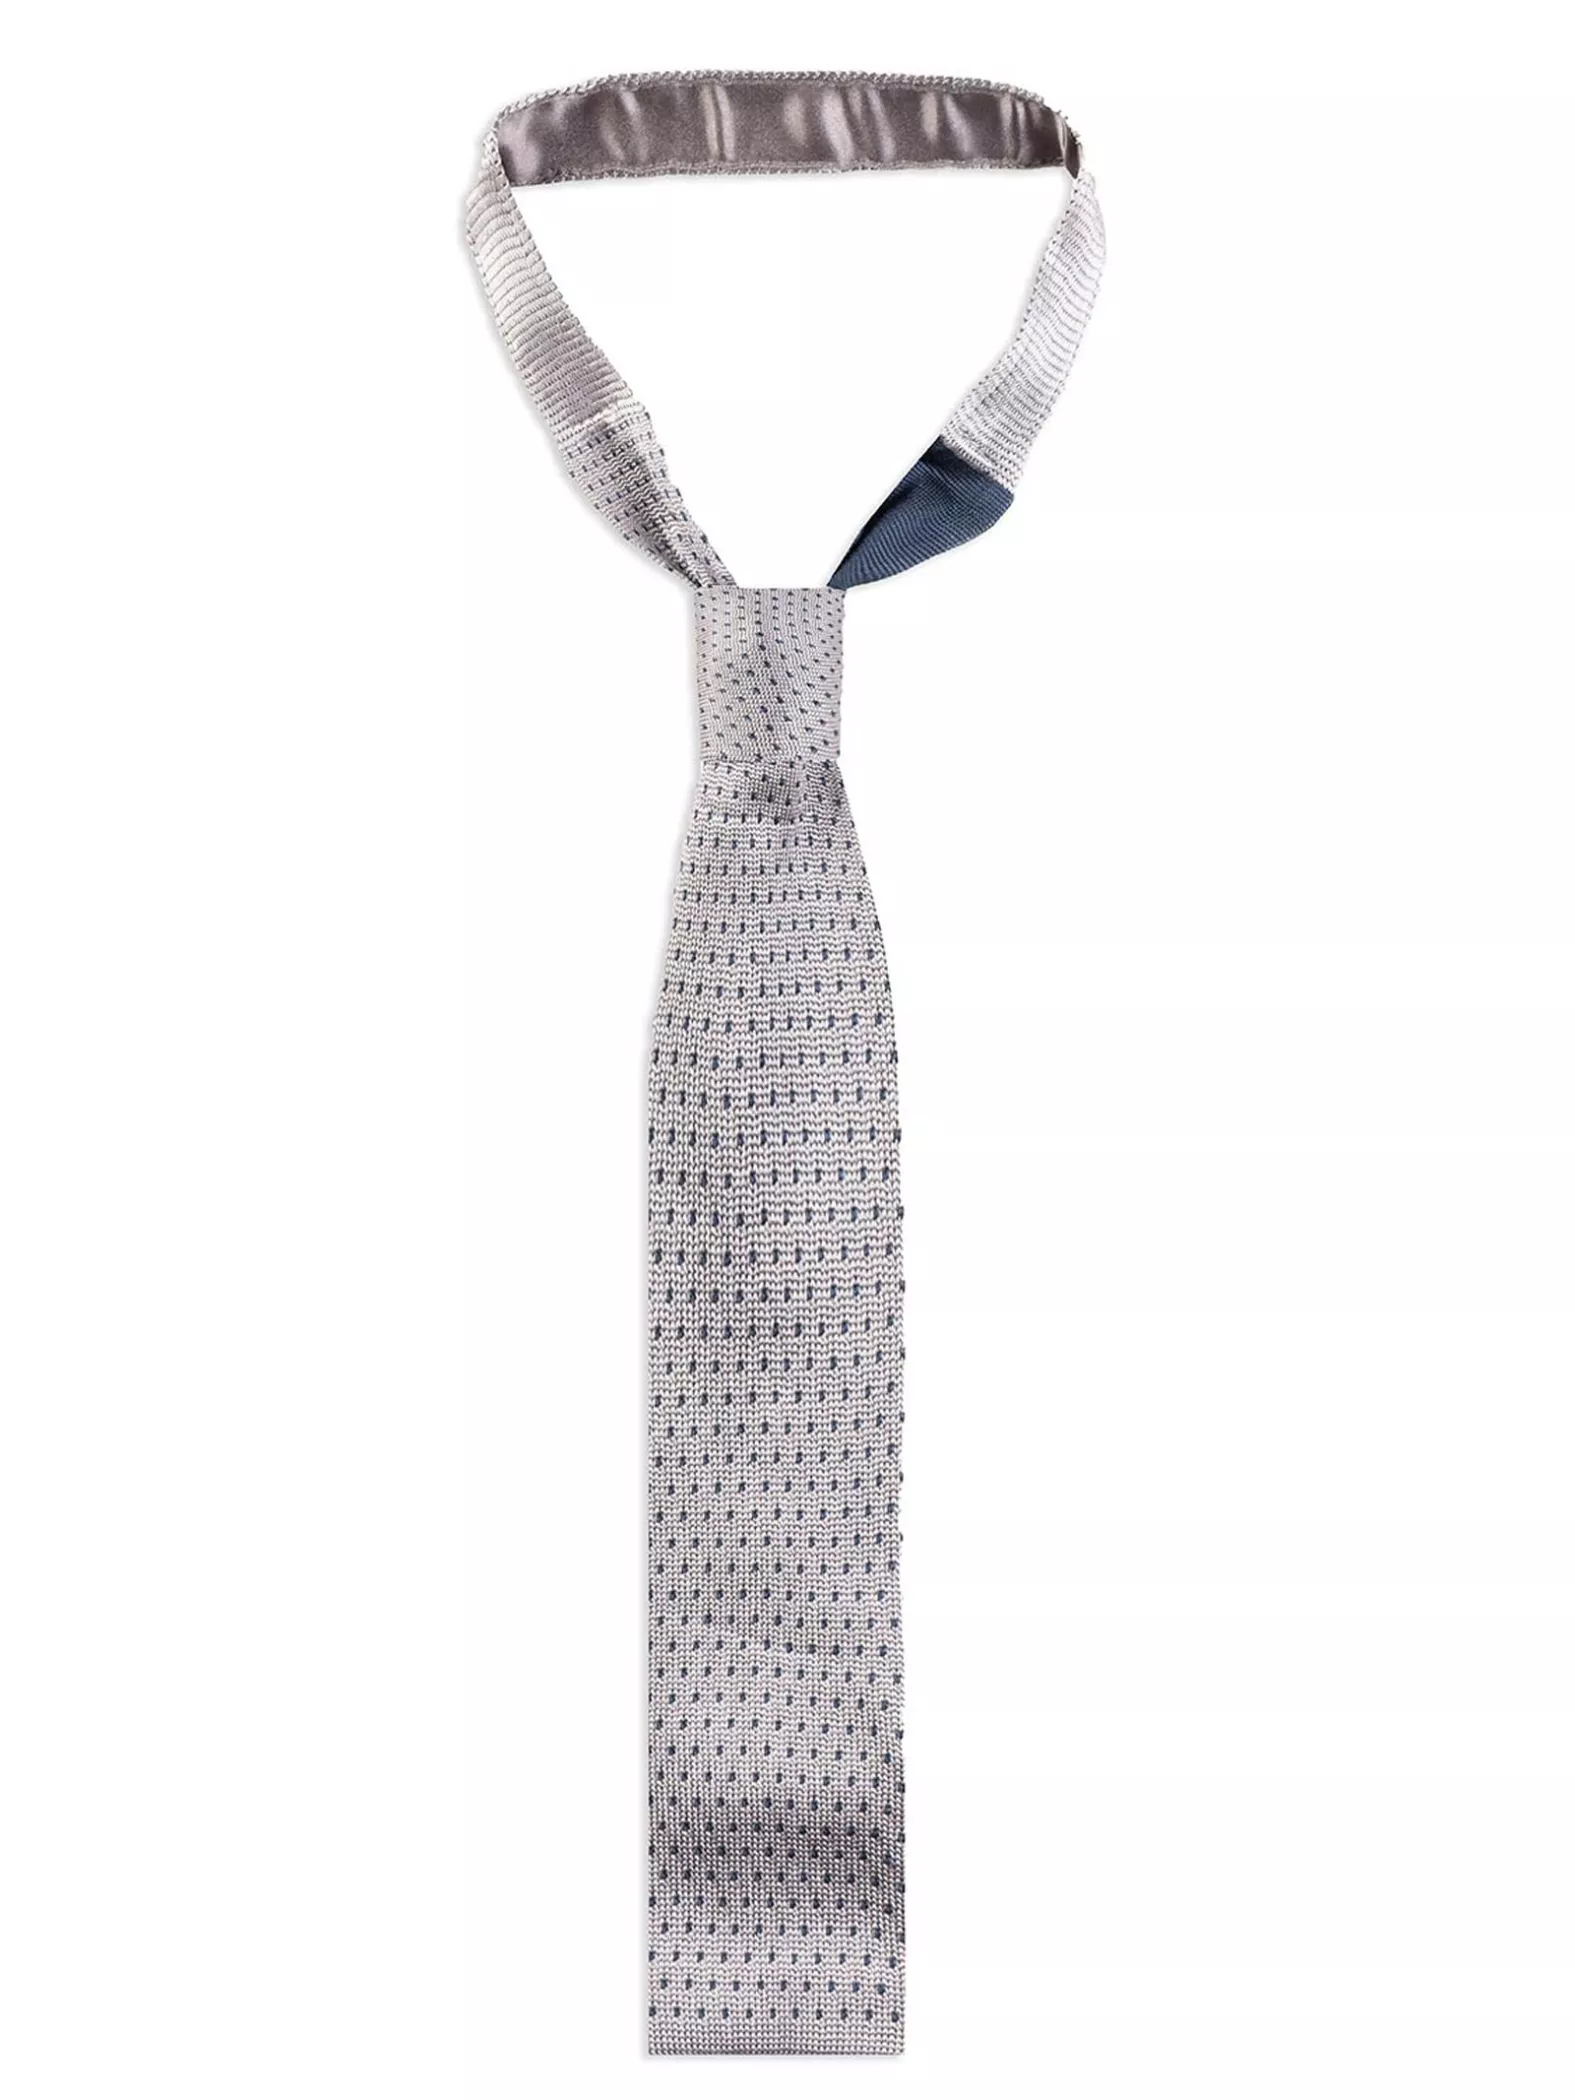 Men's Pure Silk Tie, Square Pinpoint Pattern - Refined and Elegant Style